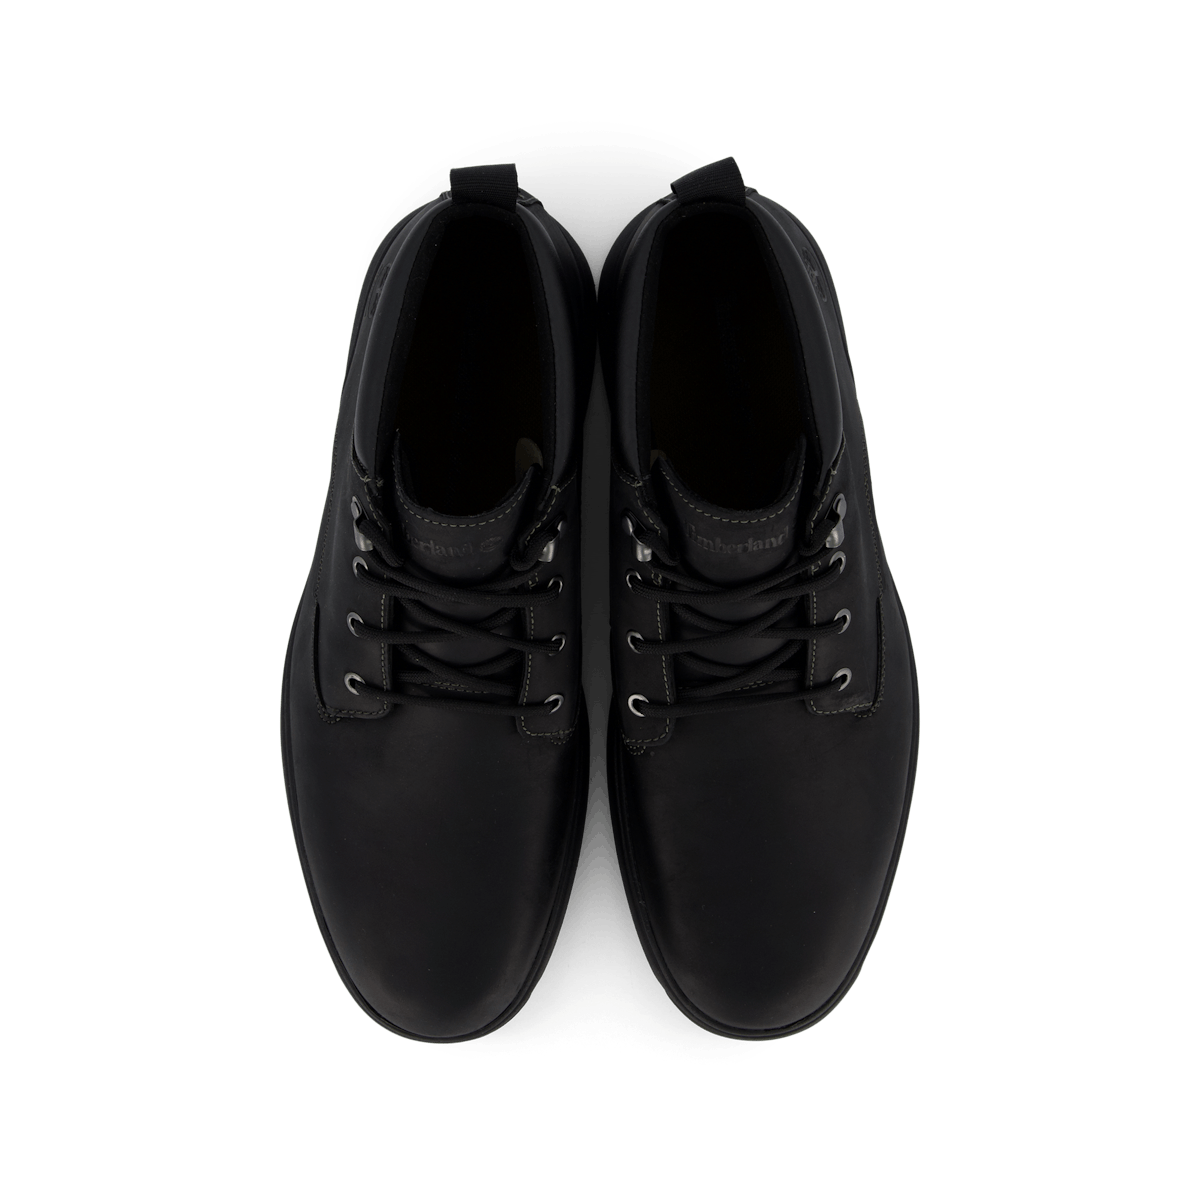 Atwells Ave Mid Lace Up Waterp Jet Black